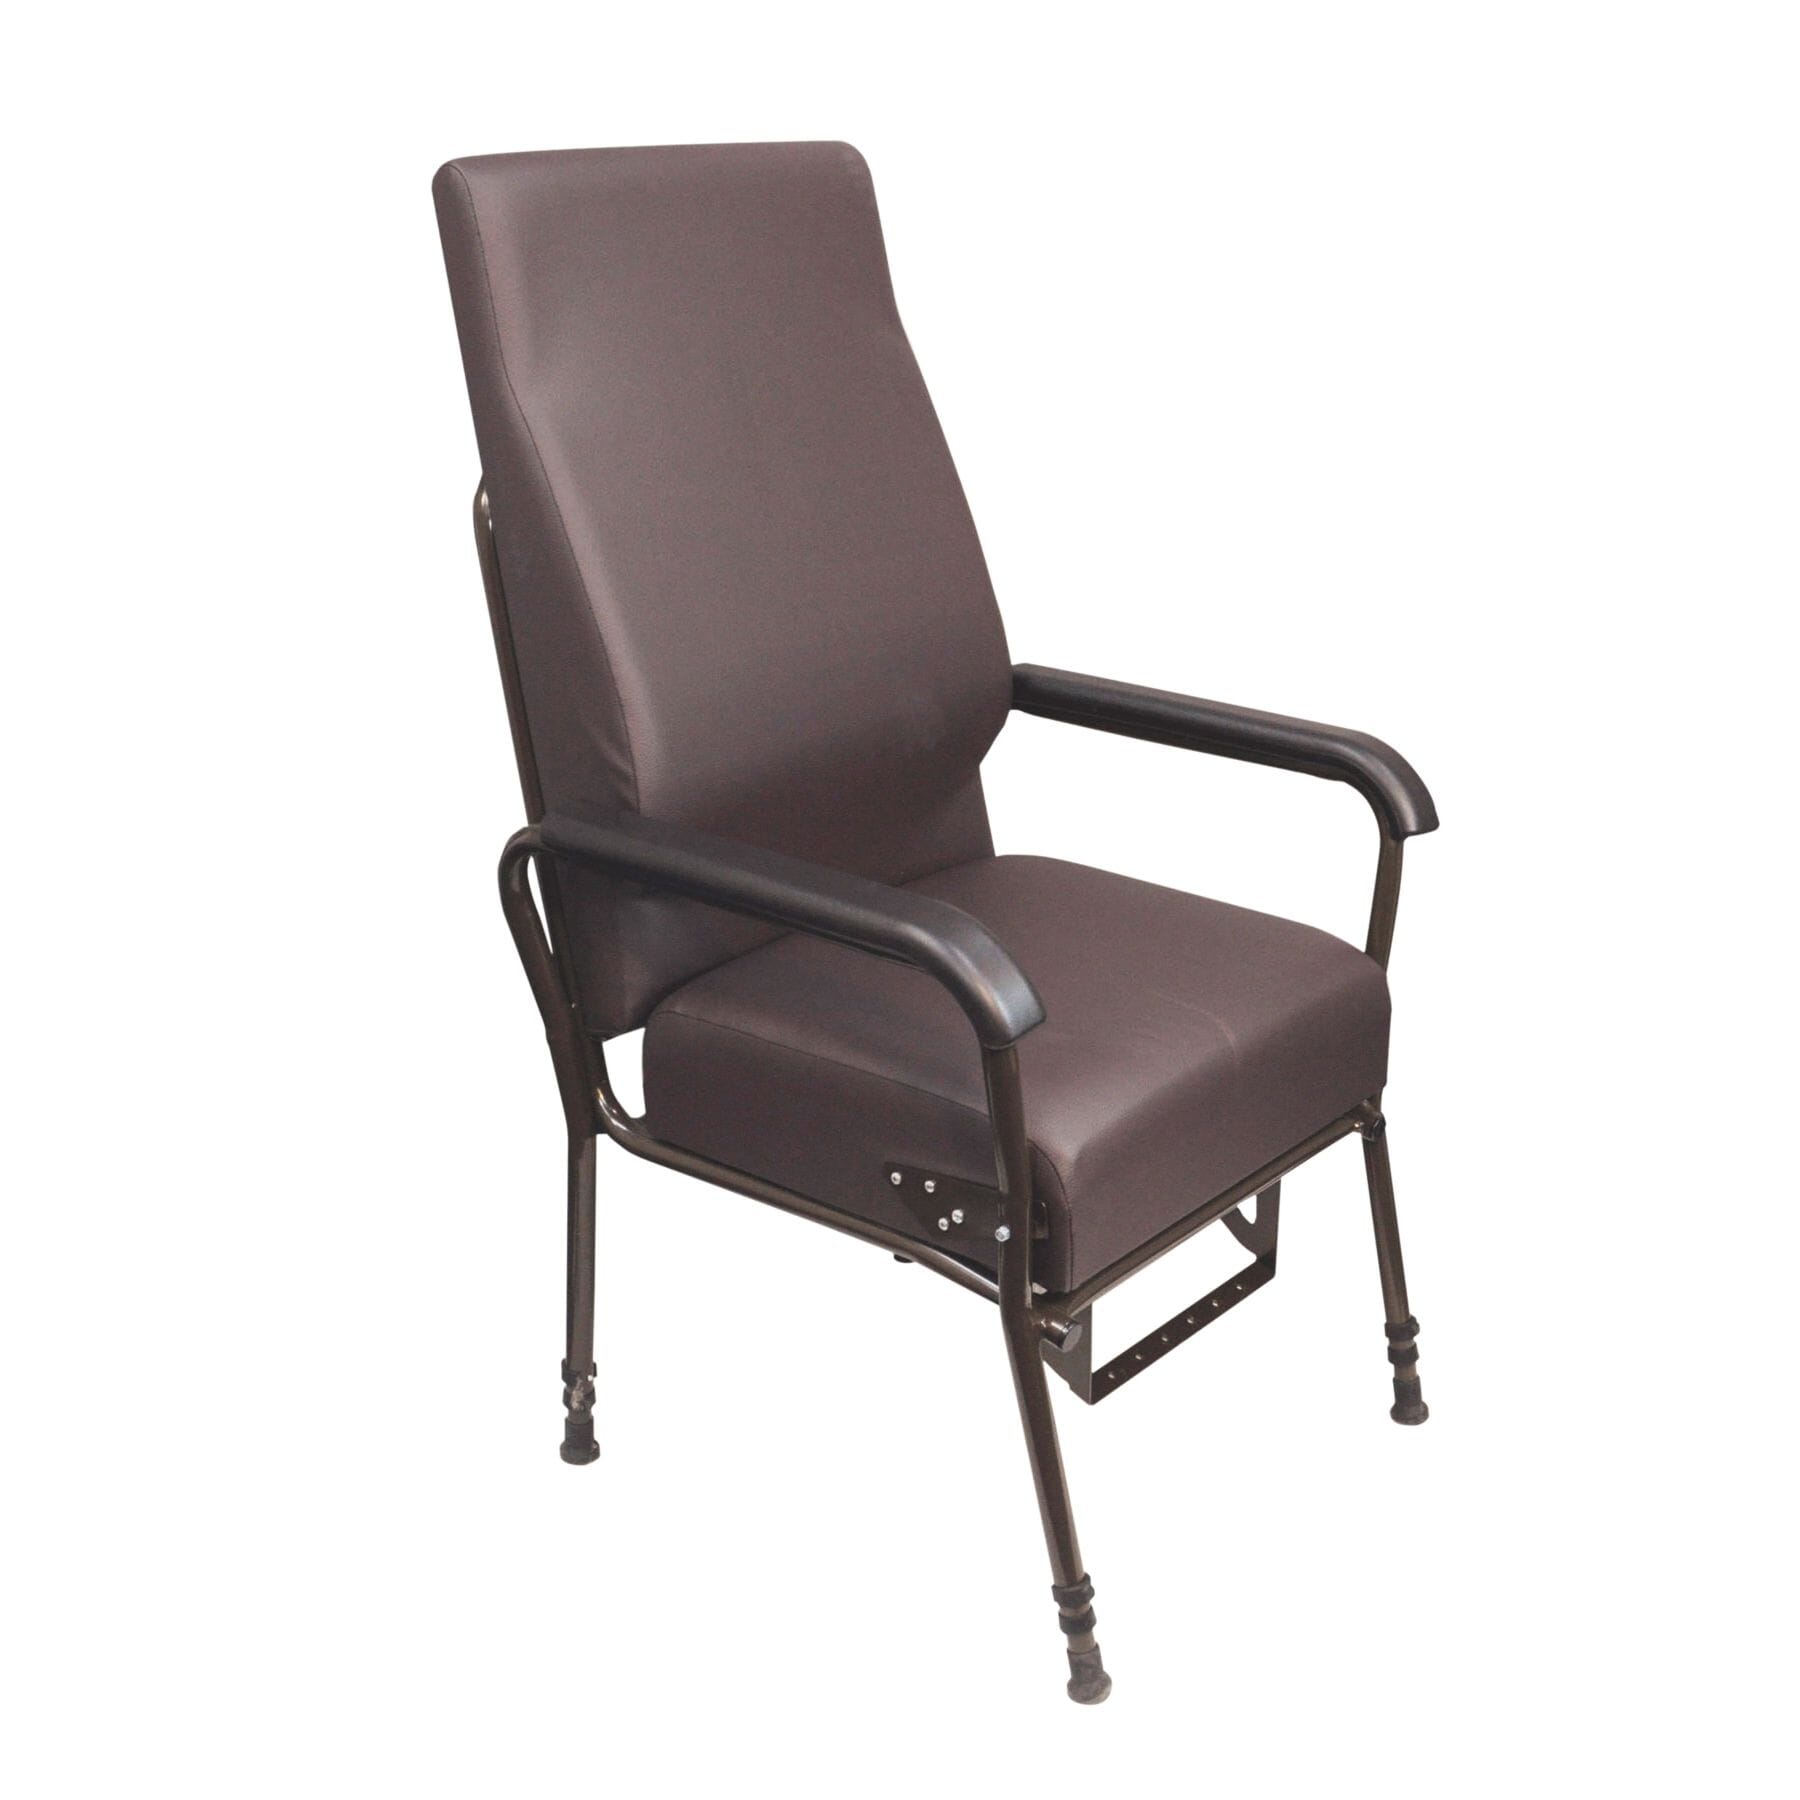 View Longfield Easy Riser Lounge Chair information